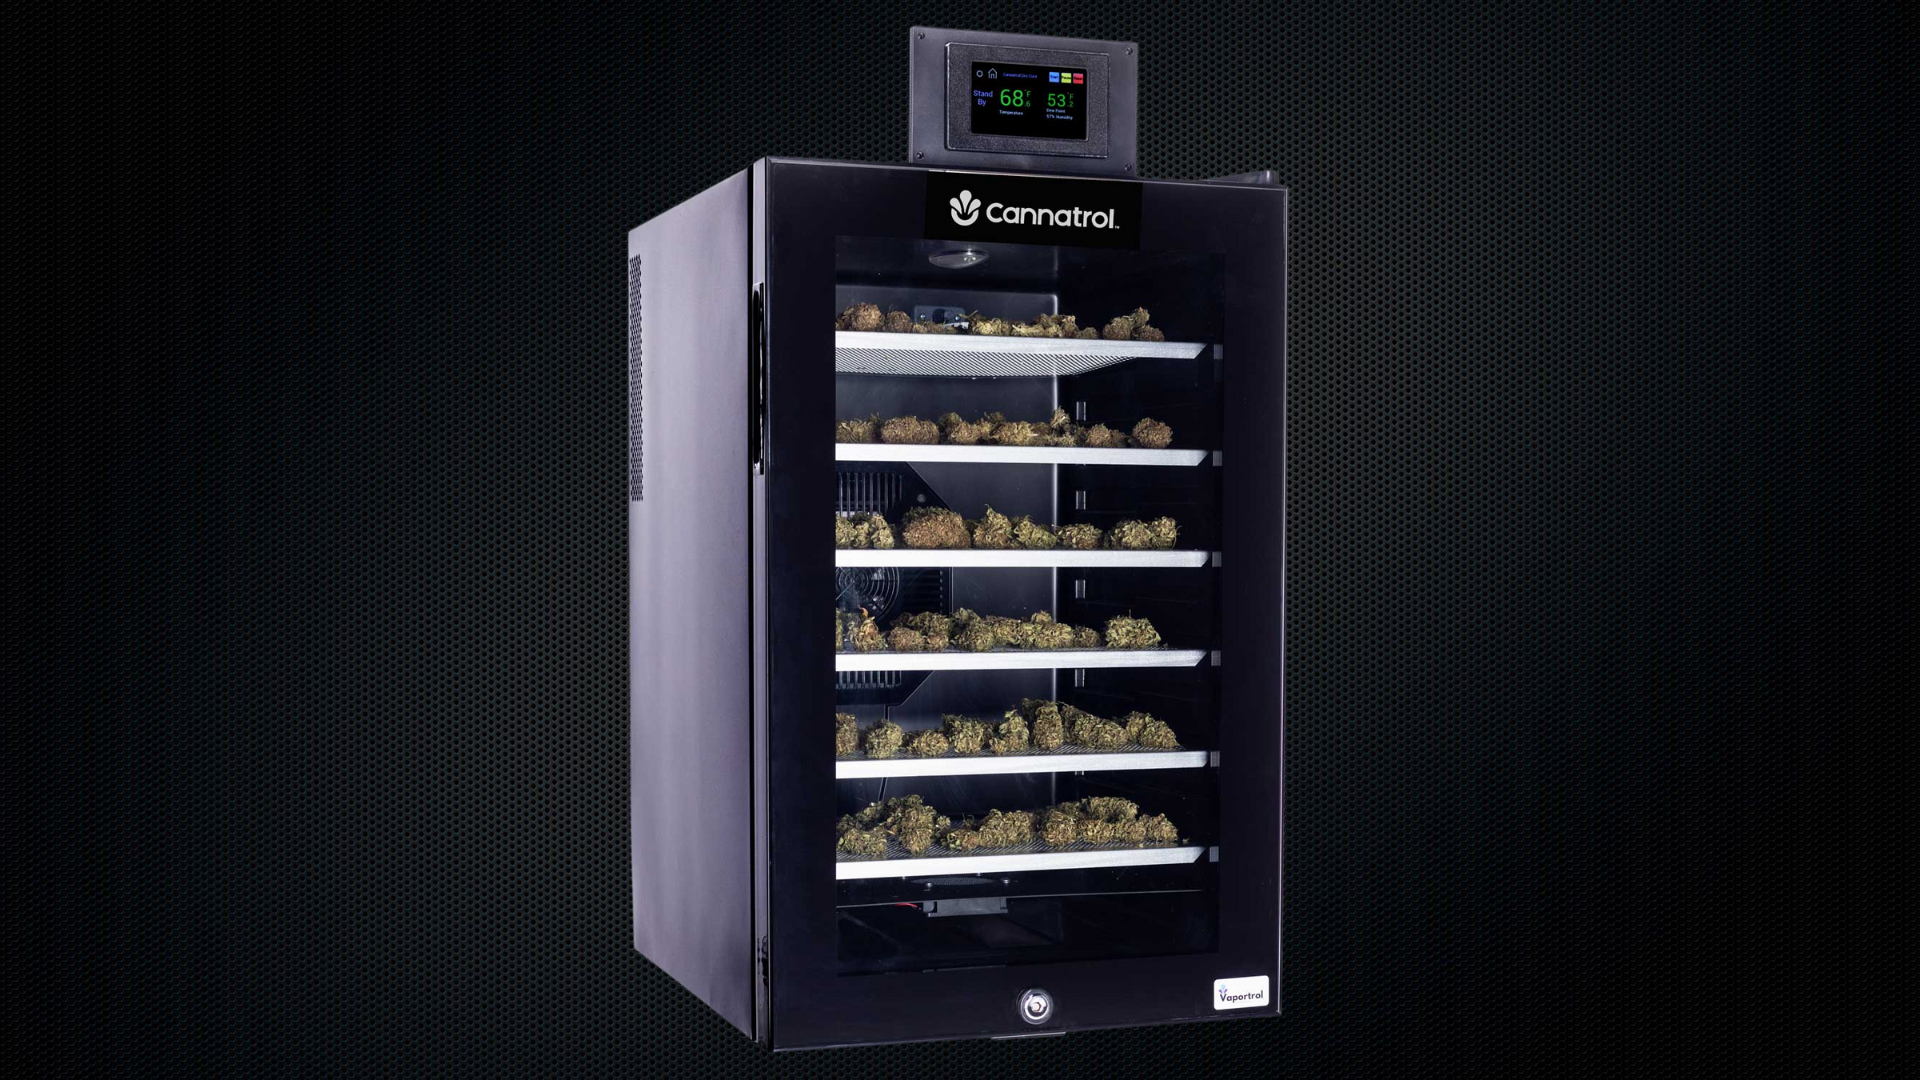 Cannatrol Review: The Ultimate Drying & Curing Machine For Your Harvest!